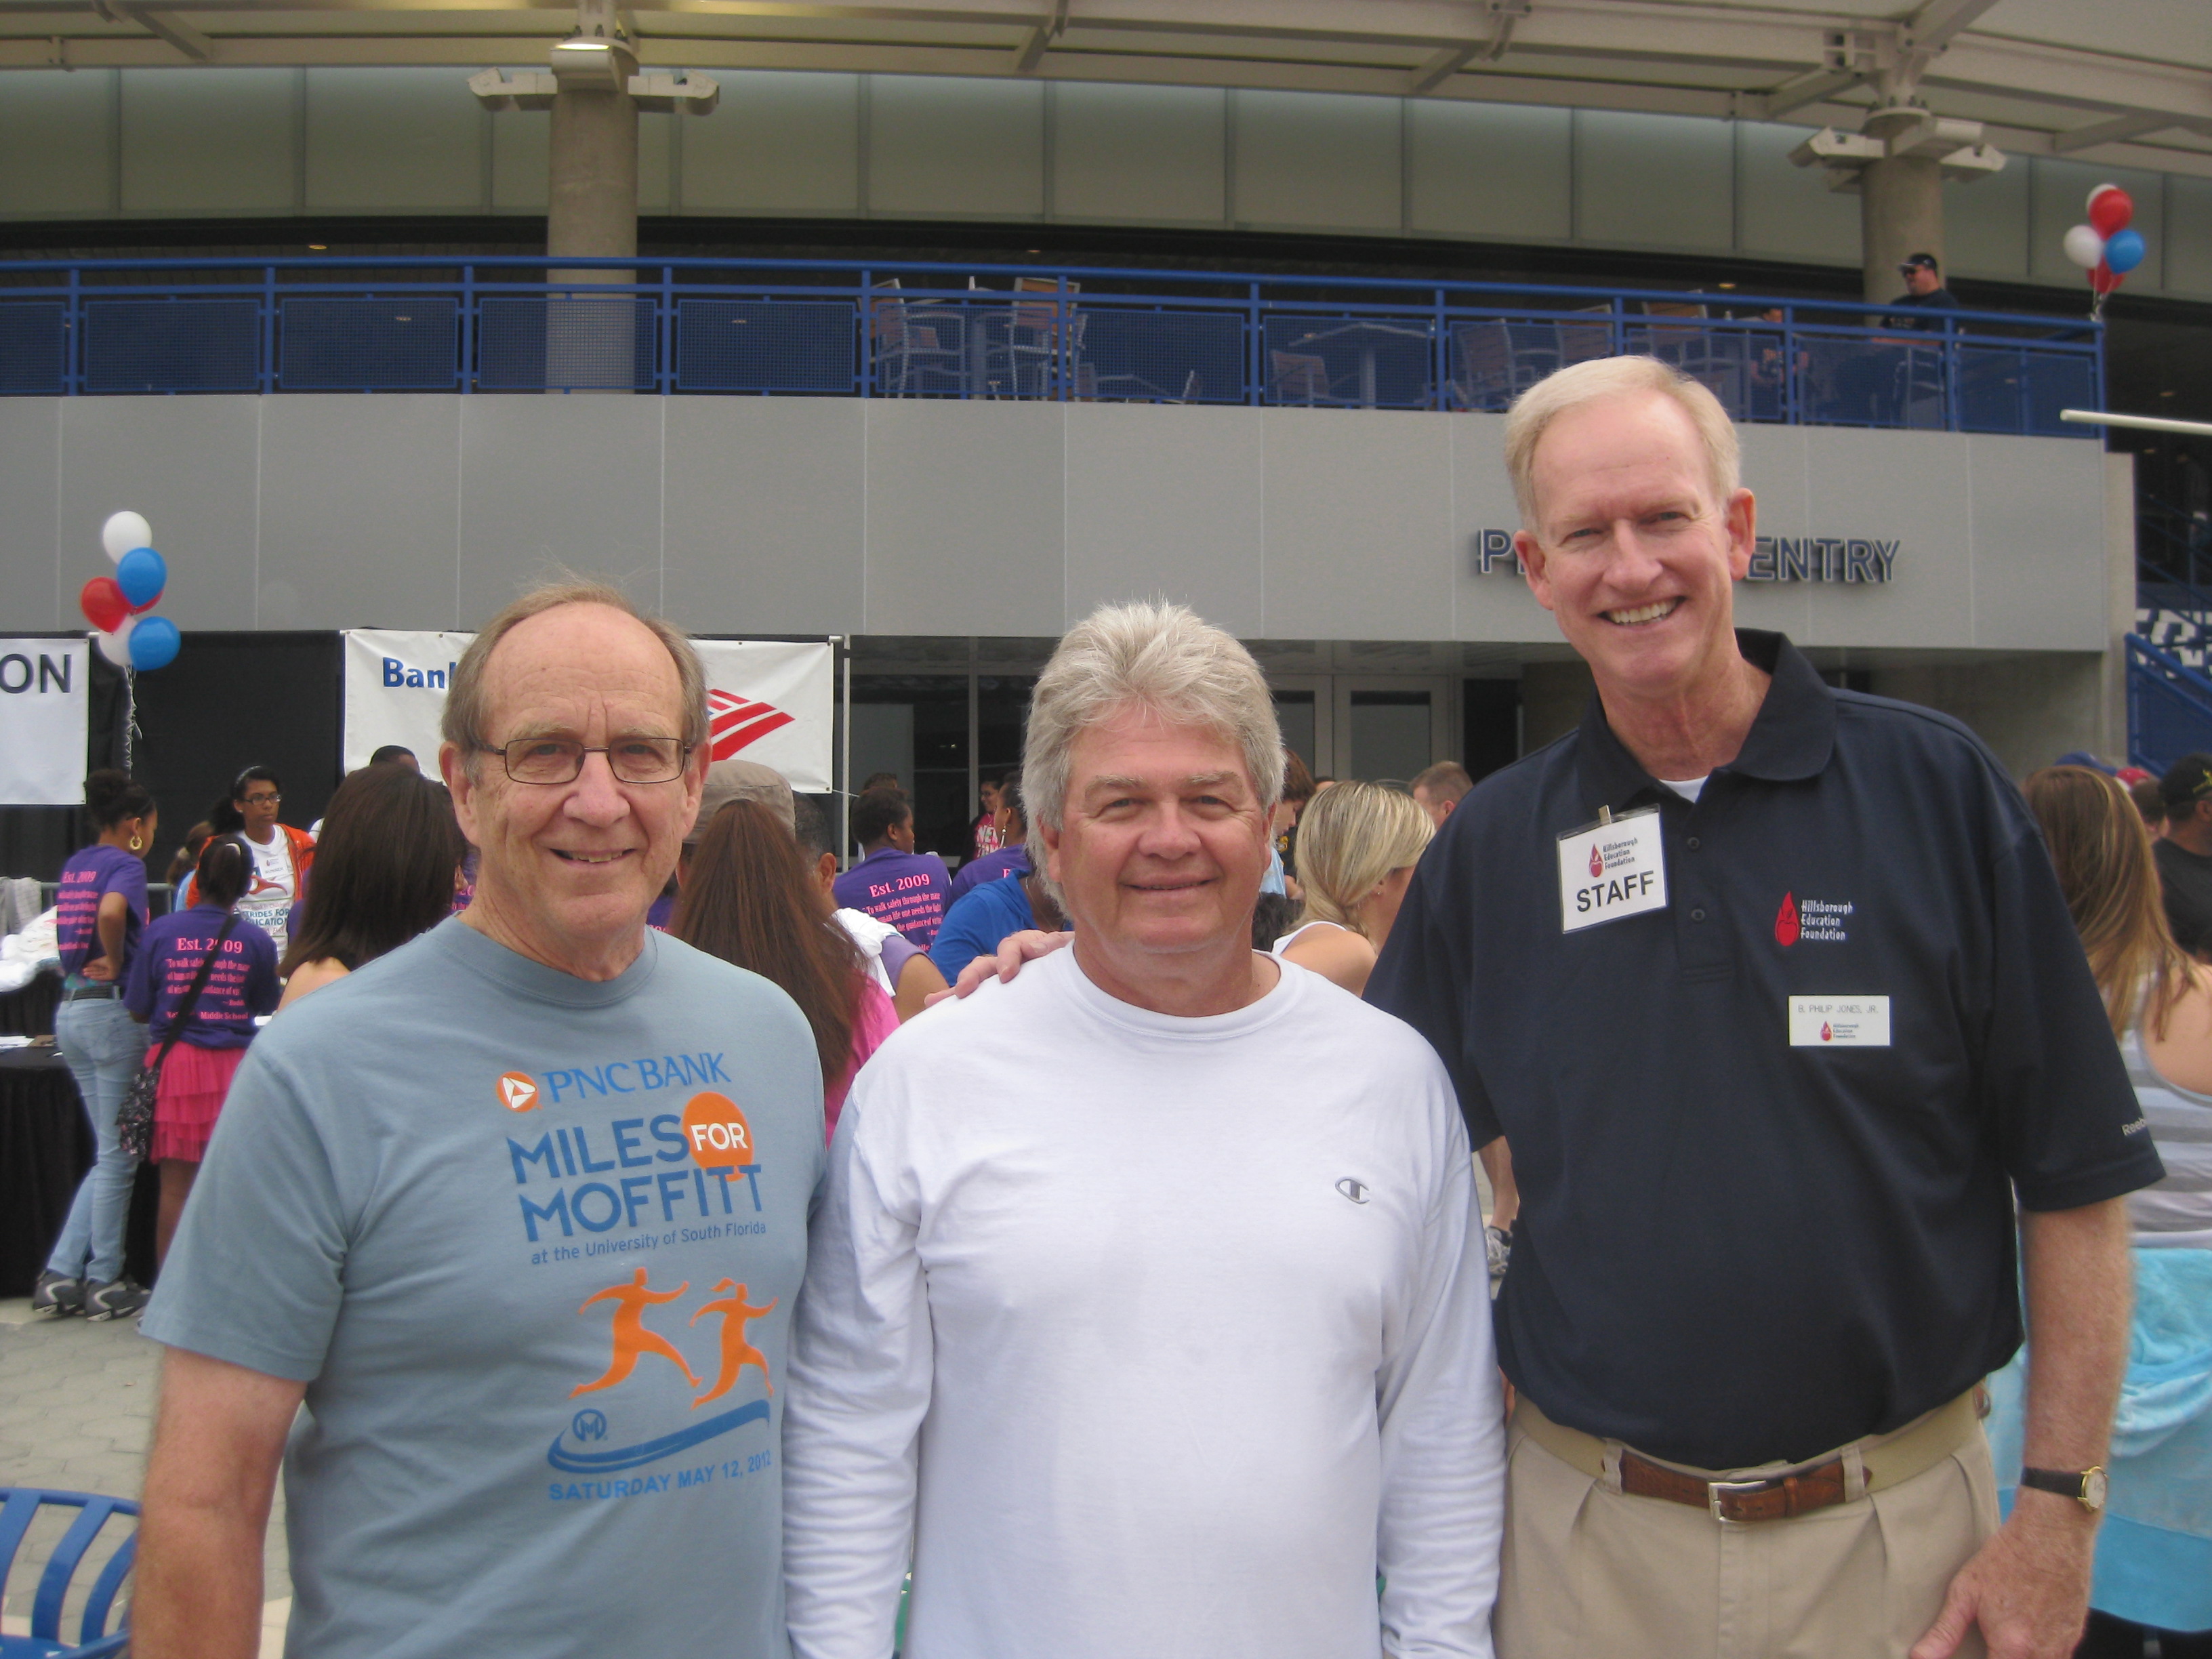 	From Left to Right: HWH Shareholders Benjamin H. Hill, III and Alton C. Ward with Phil Jones, President of the Hillsborough Education Foundation.